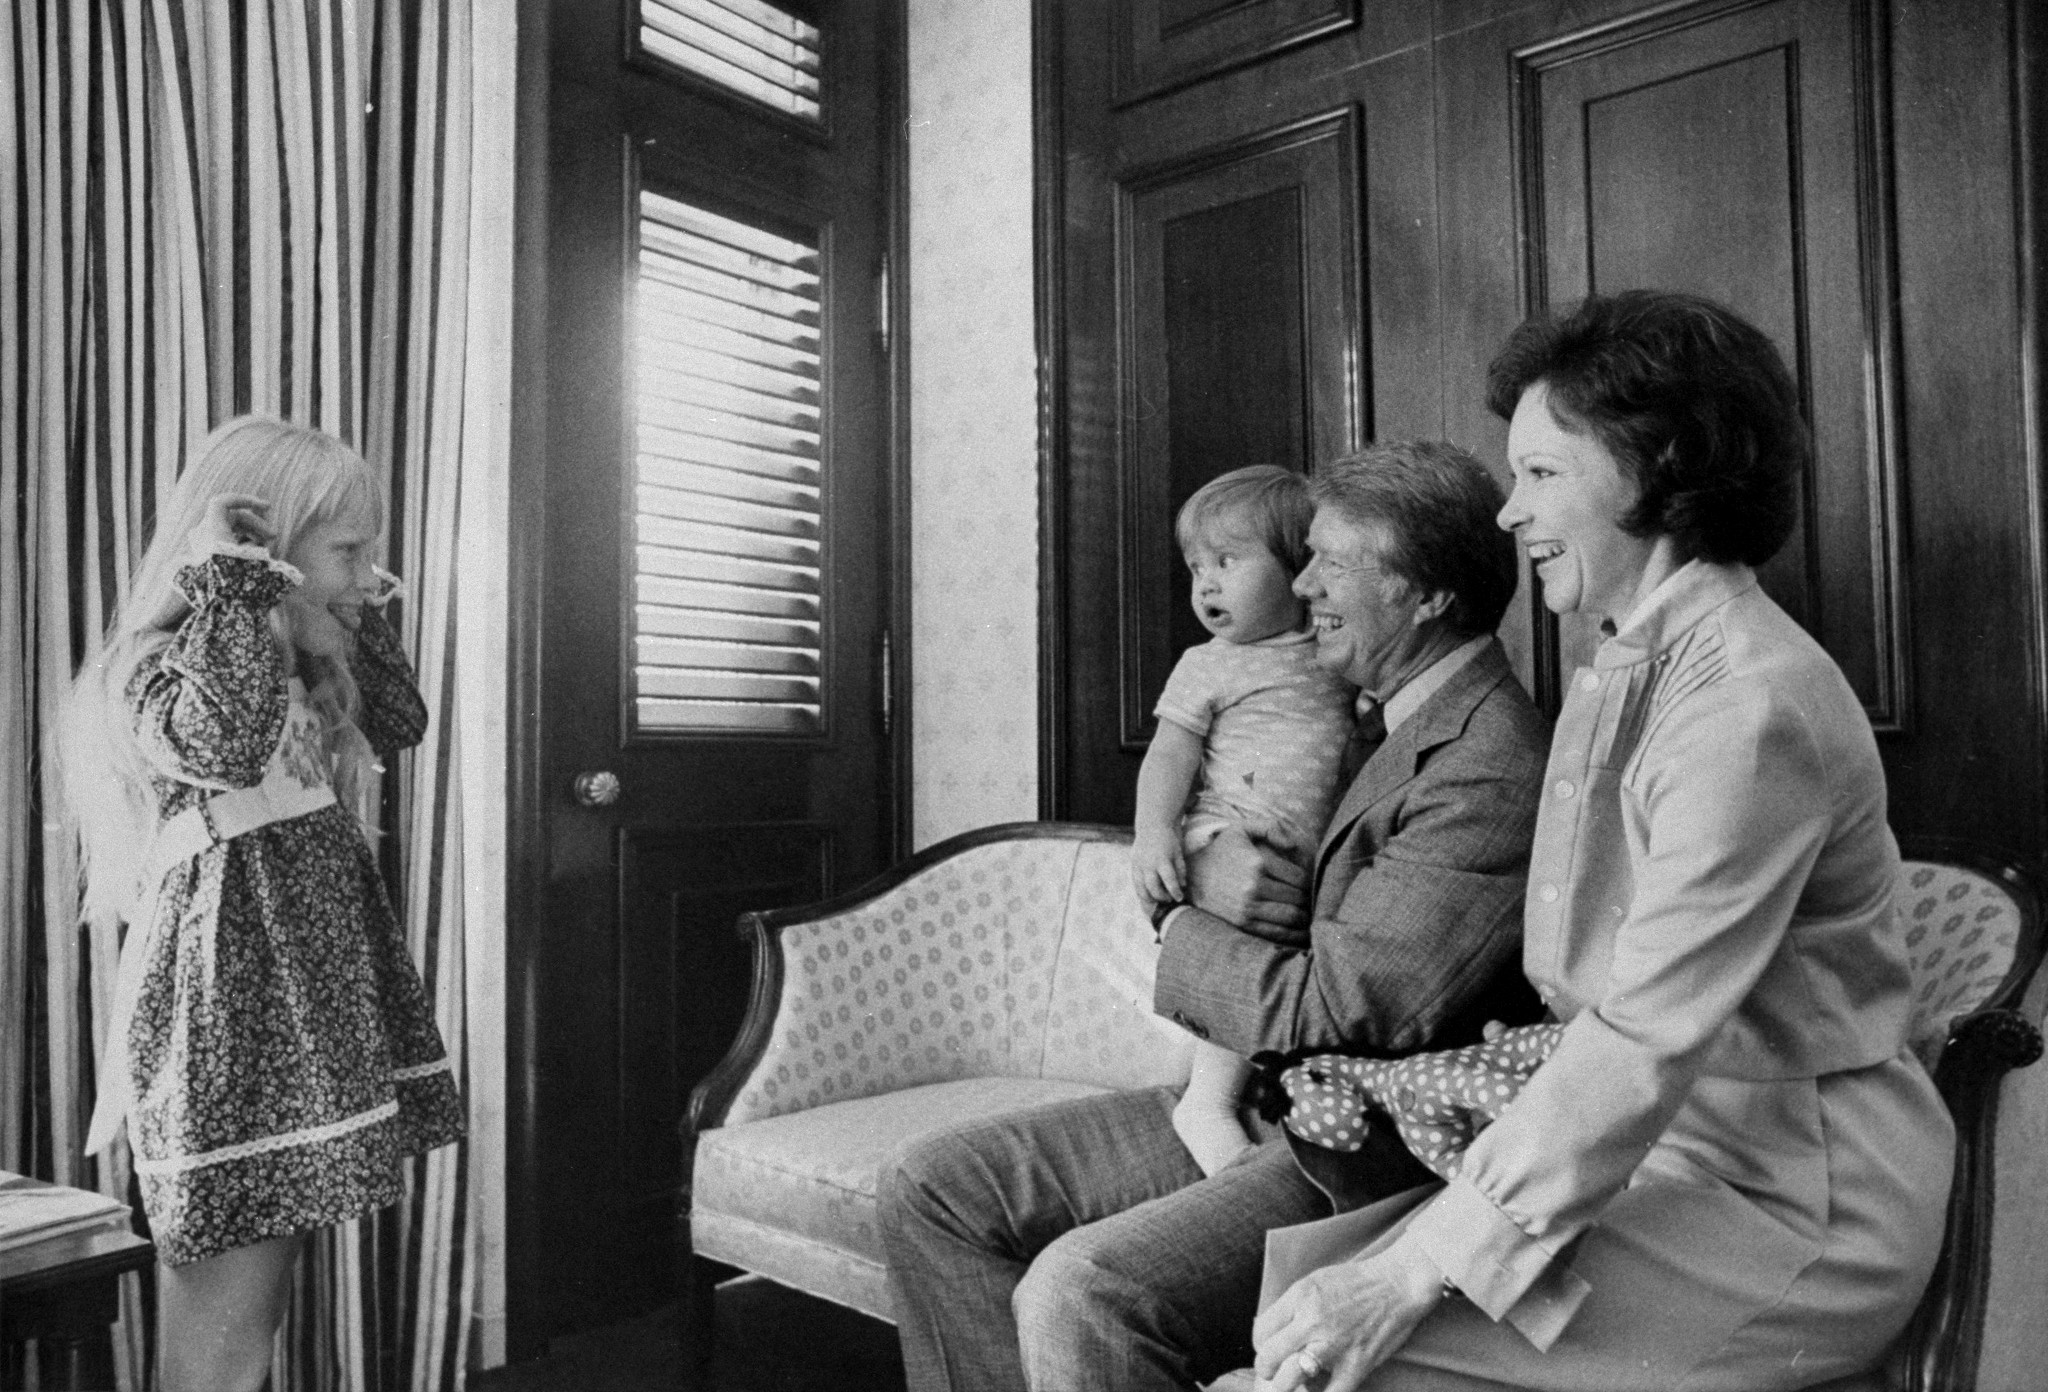 Jimmy and Rosalynn Carter, their daughter Amy Carter, and grandson Jason Carter in 1976. | Source: Getty Images